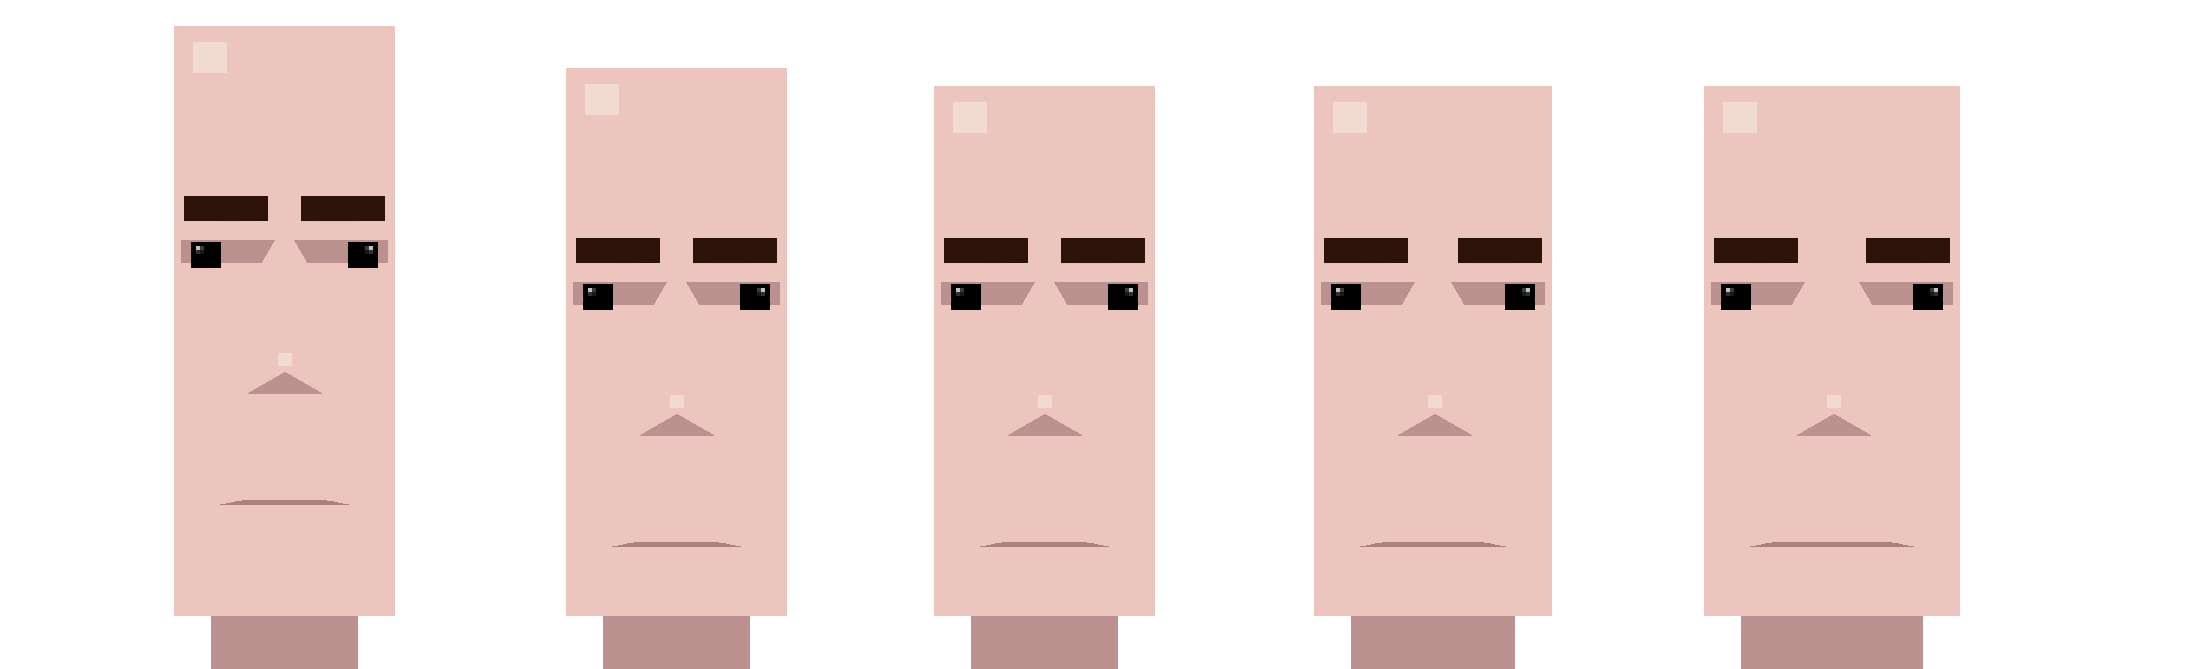 Player character faces